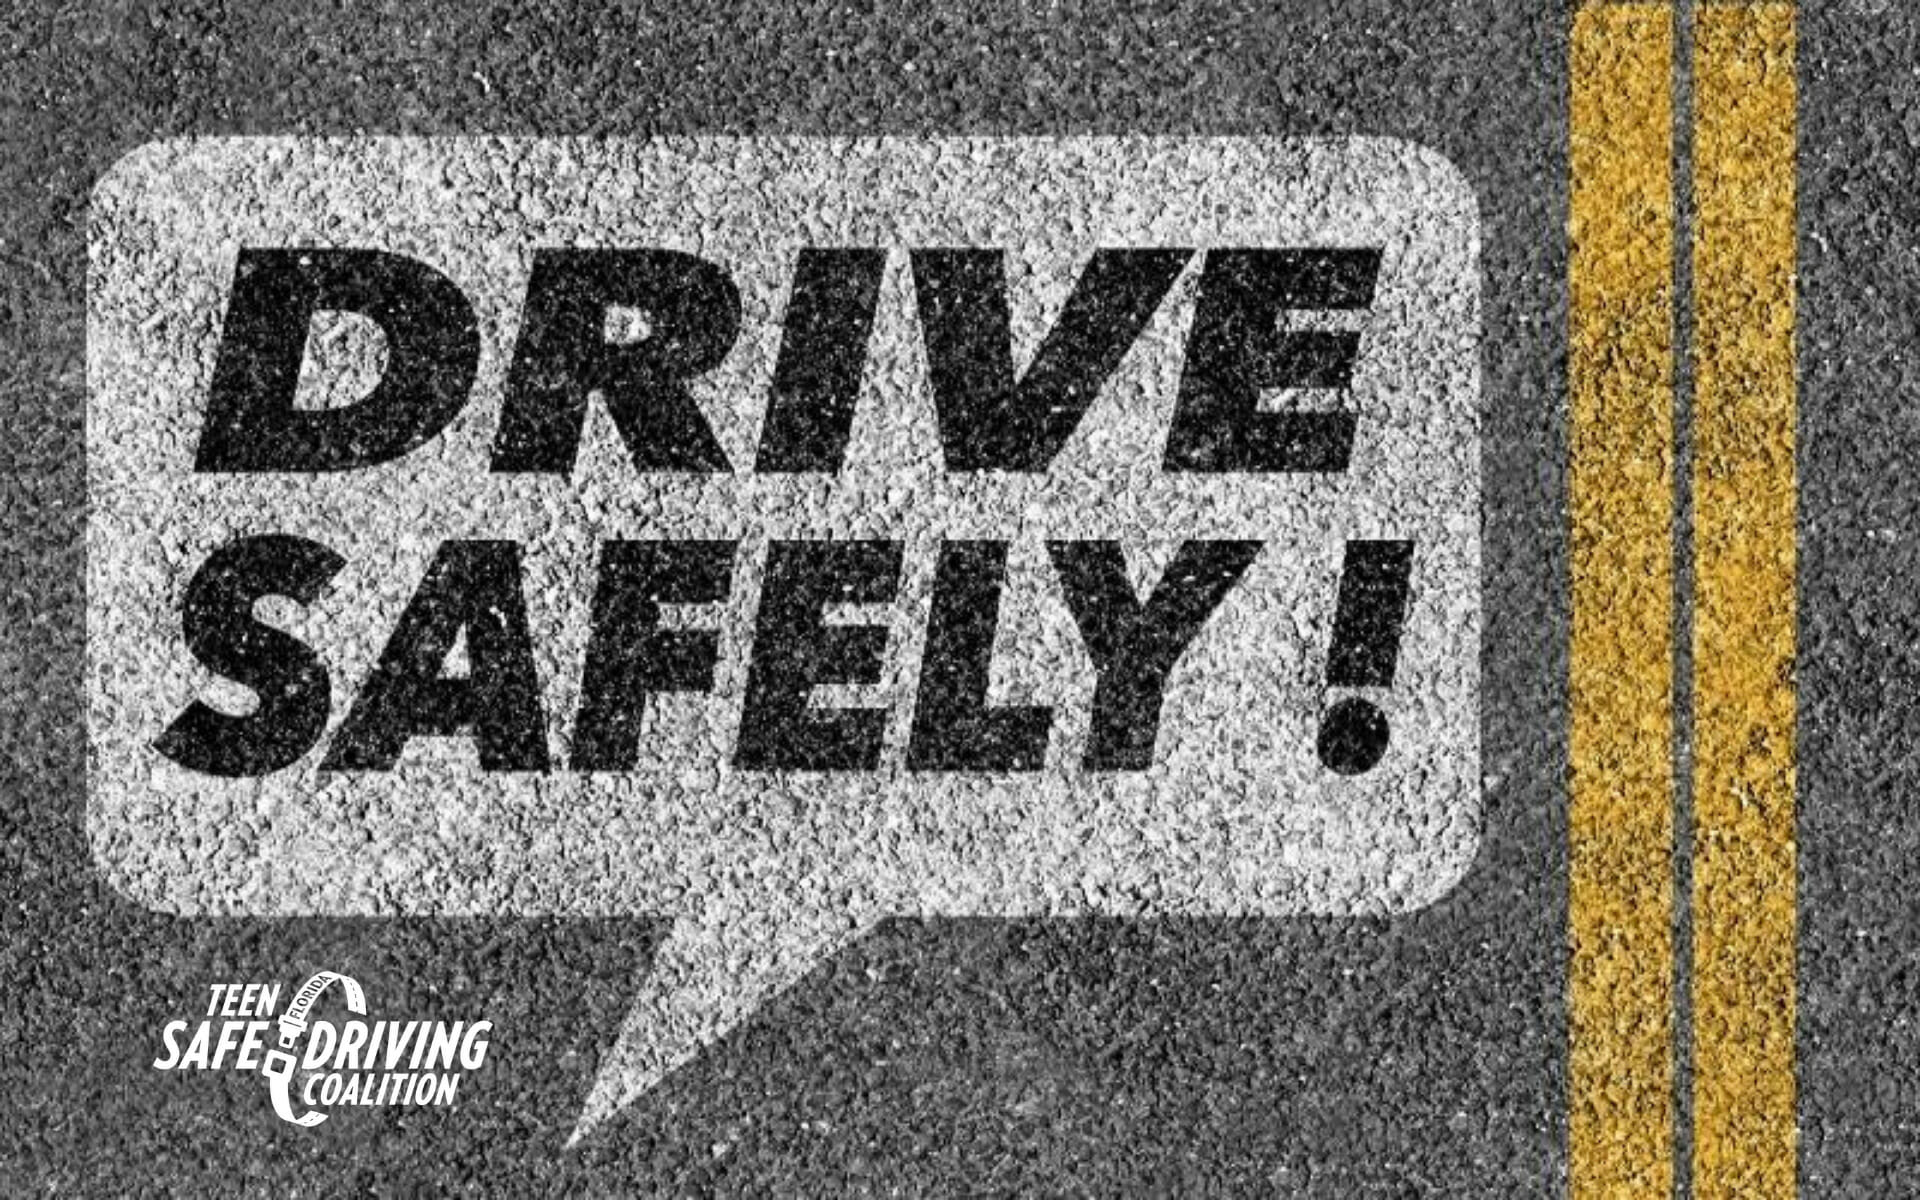 72 Safe Driving Tips That Could Save Your Life